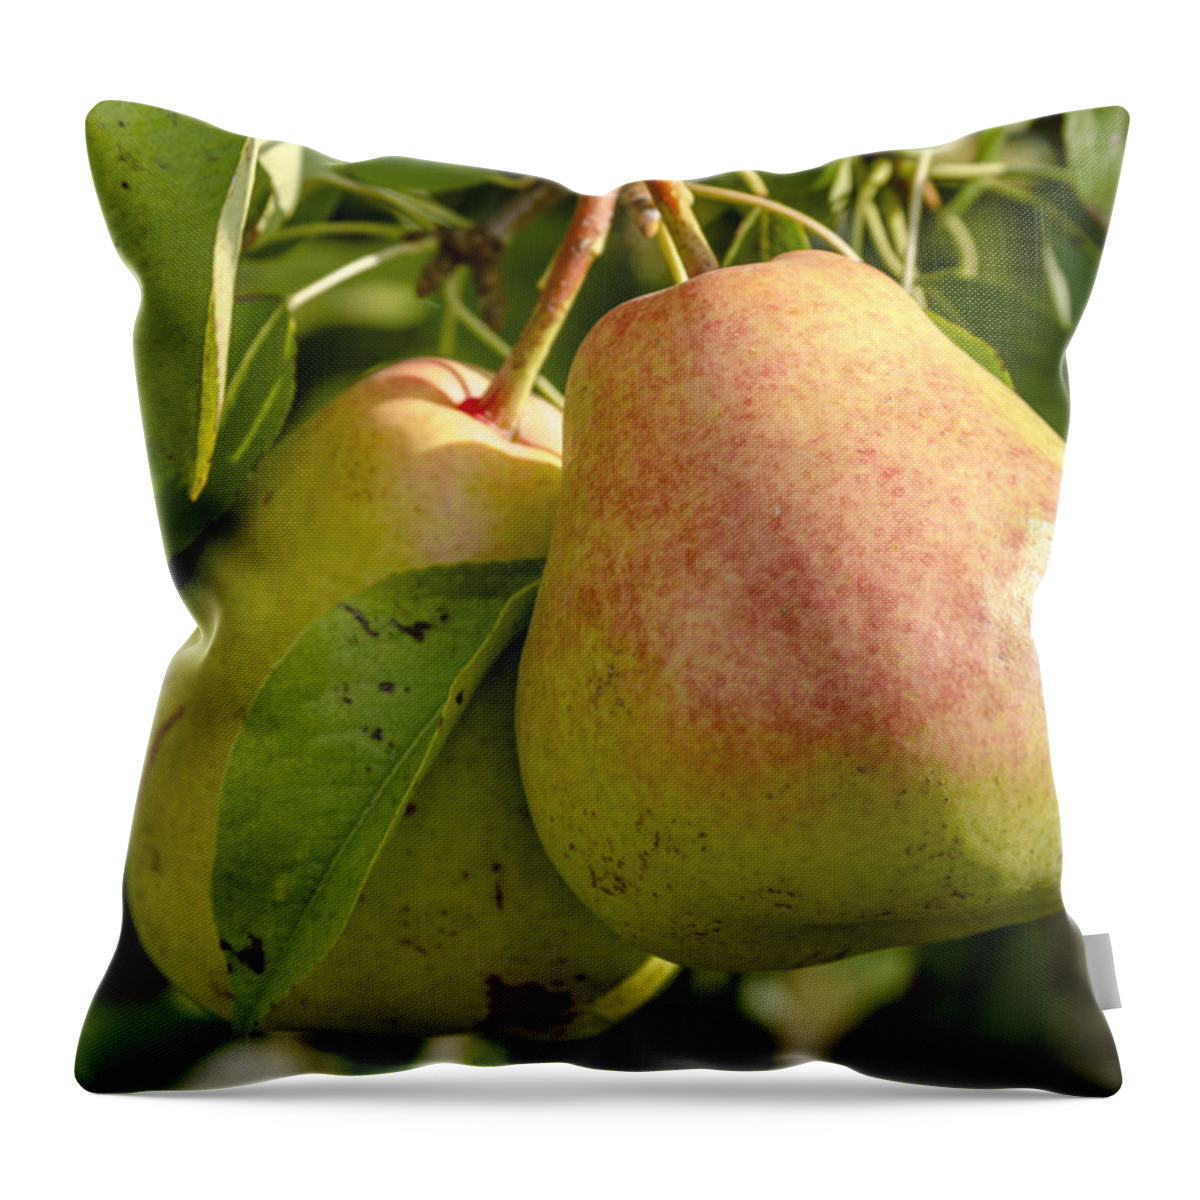 Colorado Throw Pillow featuring the photograph Organic Pears Hanging in Orchard by Teri Virbickis